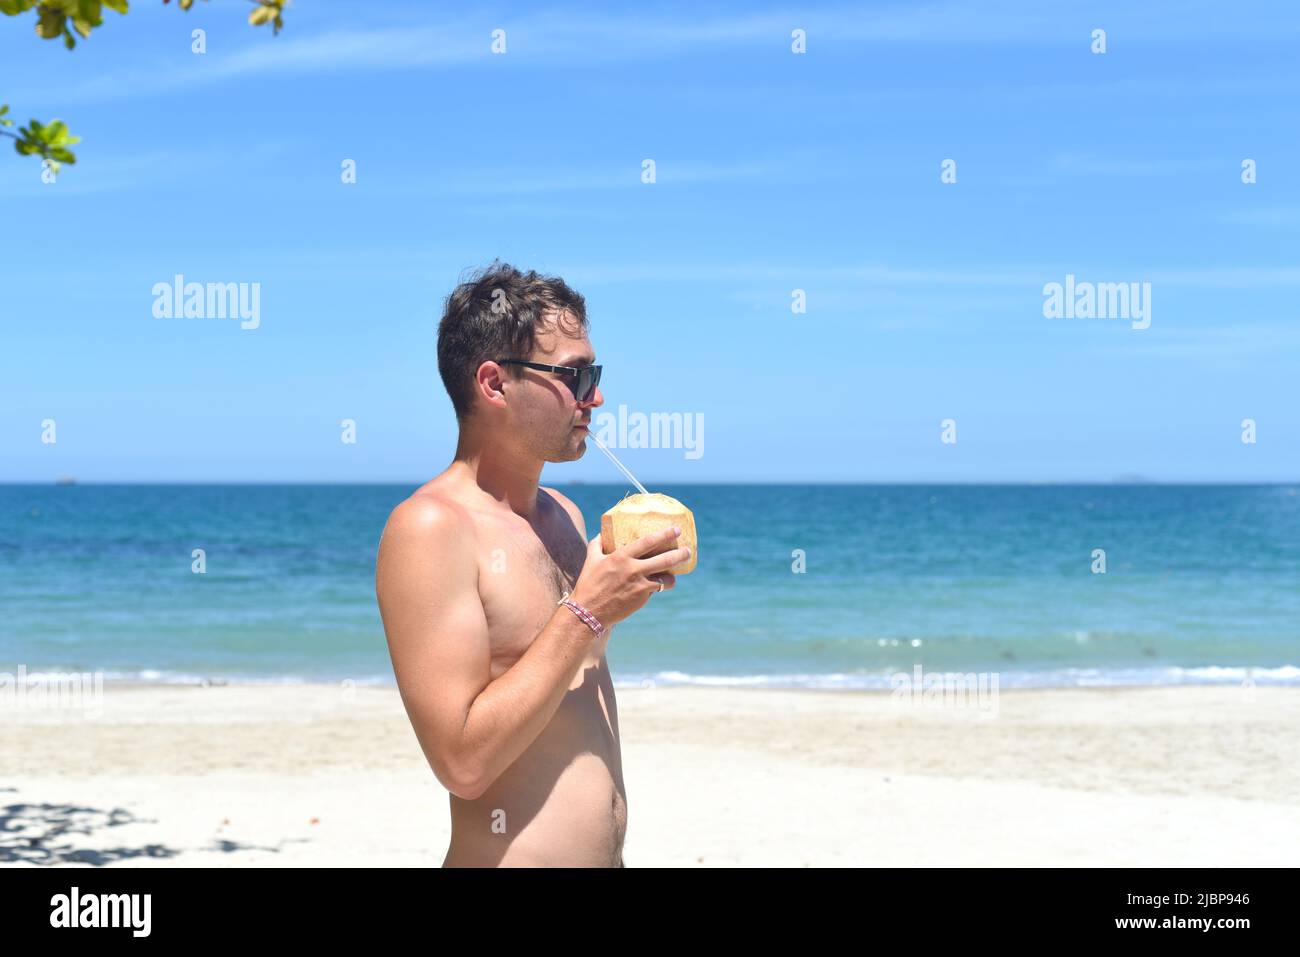 Young man drinking coconut on sandy beach Stock Photo